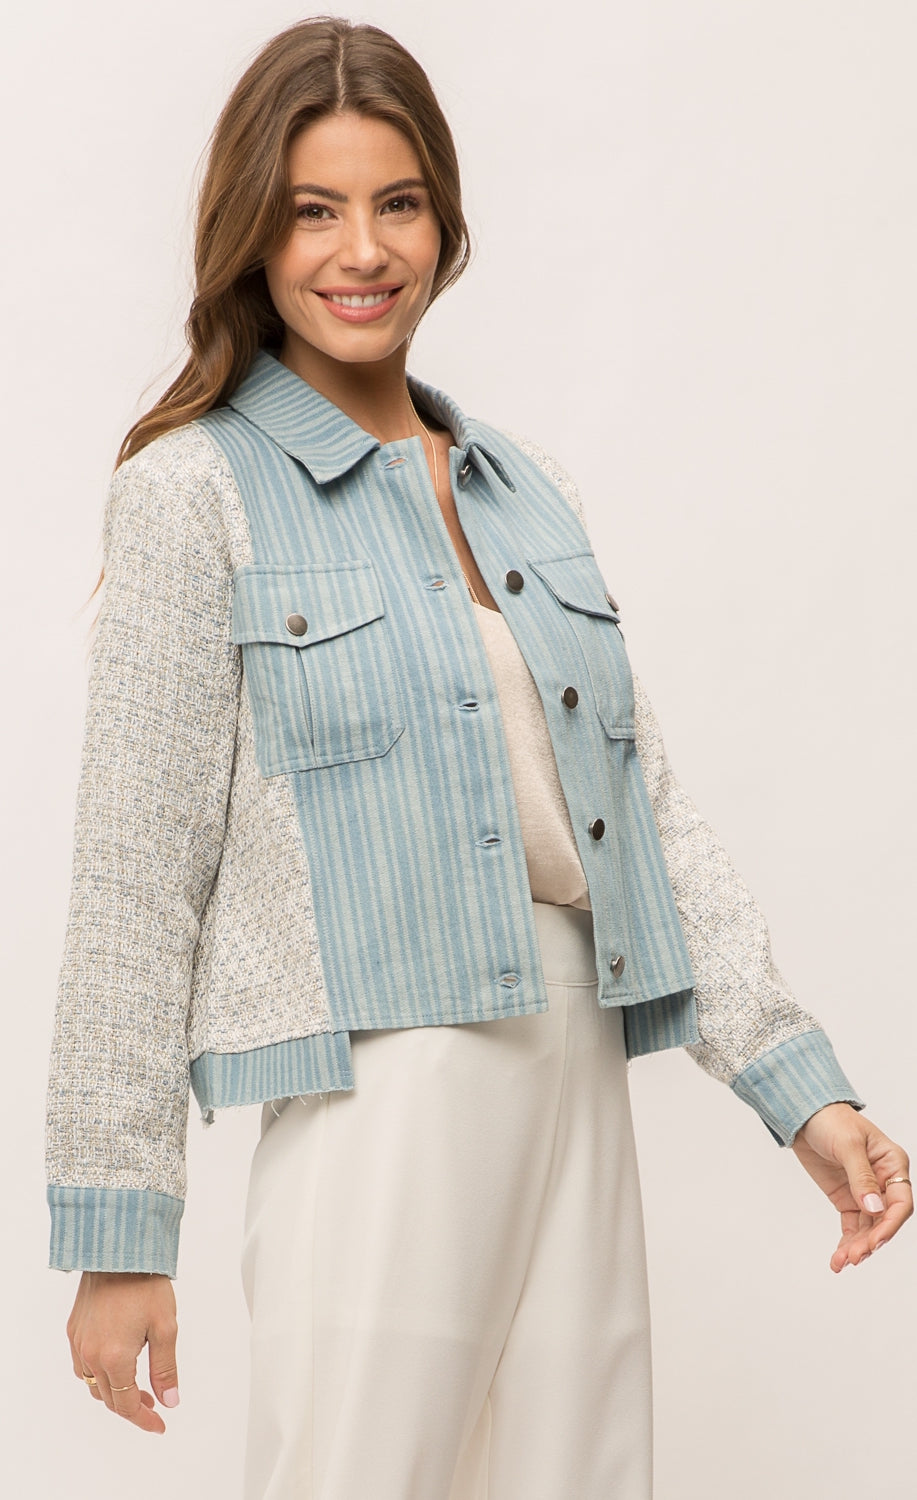 Front, right sided top half view of a woman wearing the Mystree Mix Media Jean Jacket with an off-white pant and over an off-white tank. This jacket has a striped denim body with woven grey and blue sleeves and sides. The front has two patch breast pockets and a button up front. 